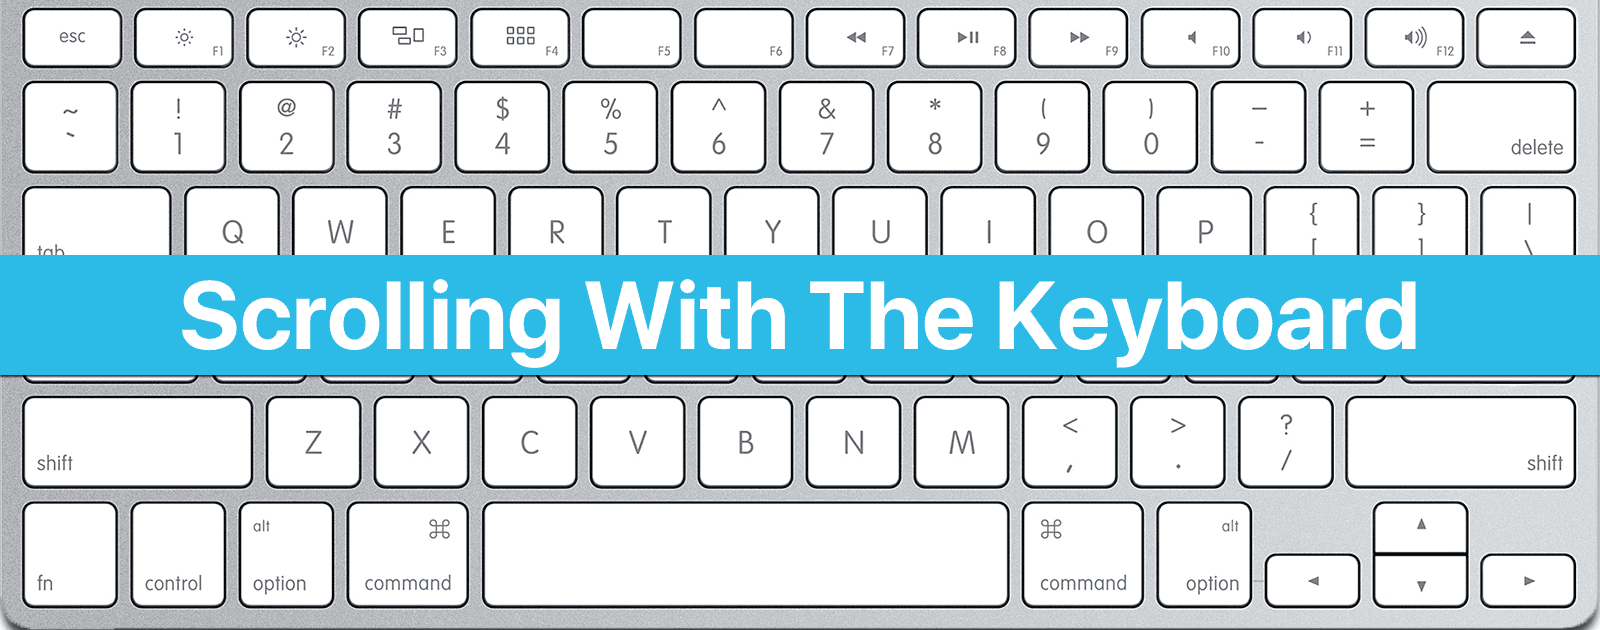 macOS: Use These Keys to Keyboard Scroll Through Apps